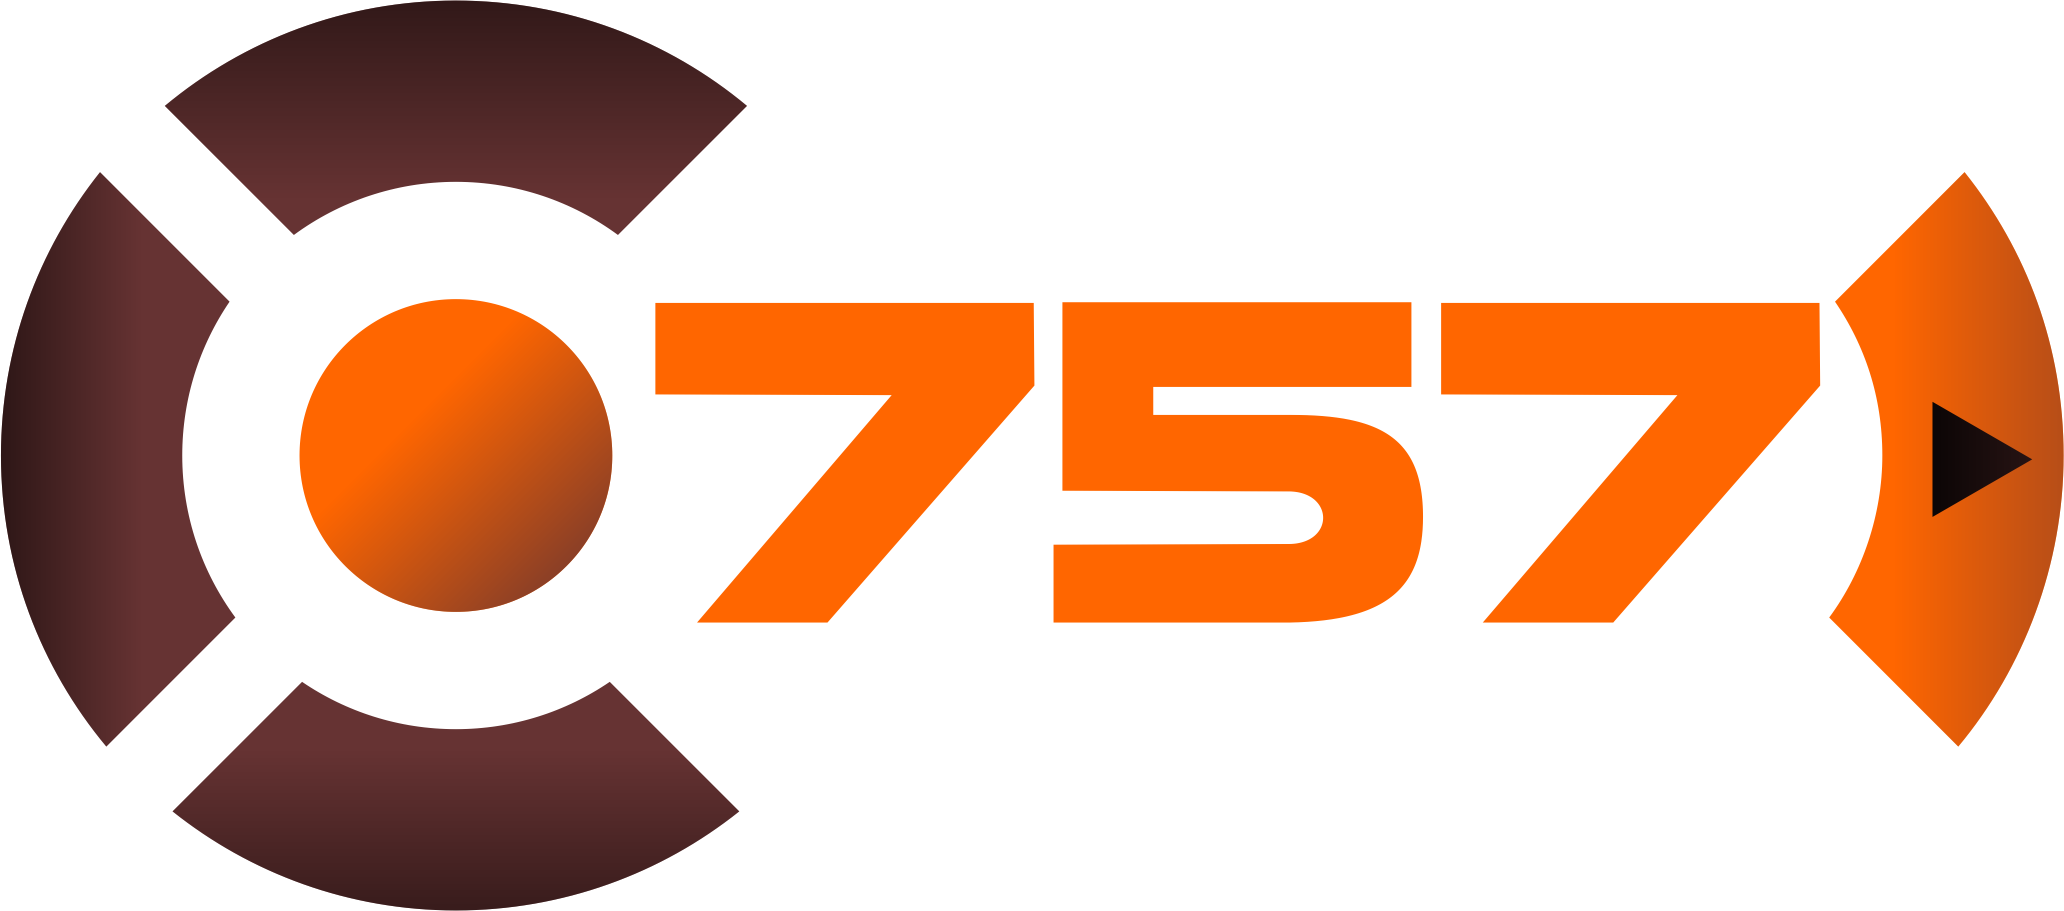 Channel 757